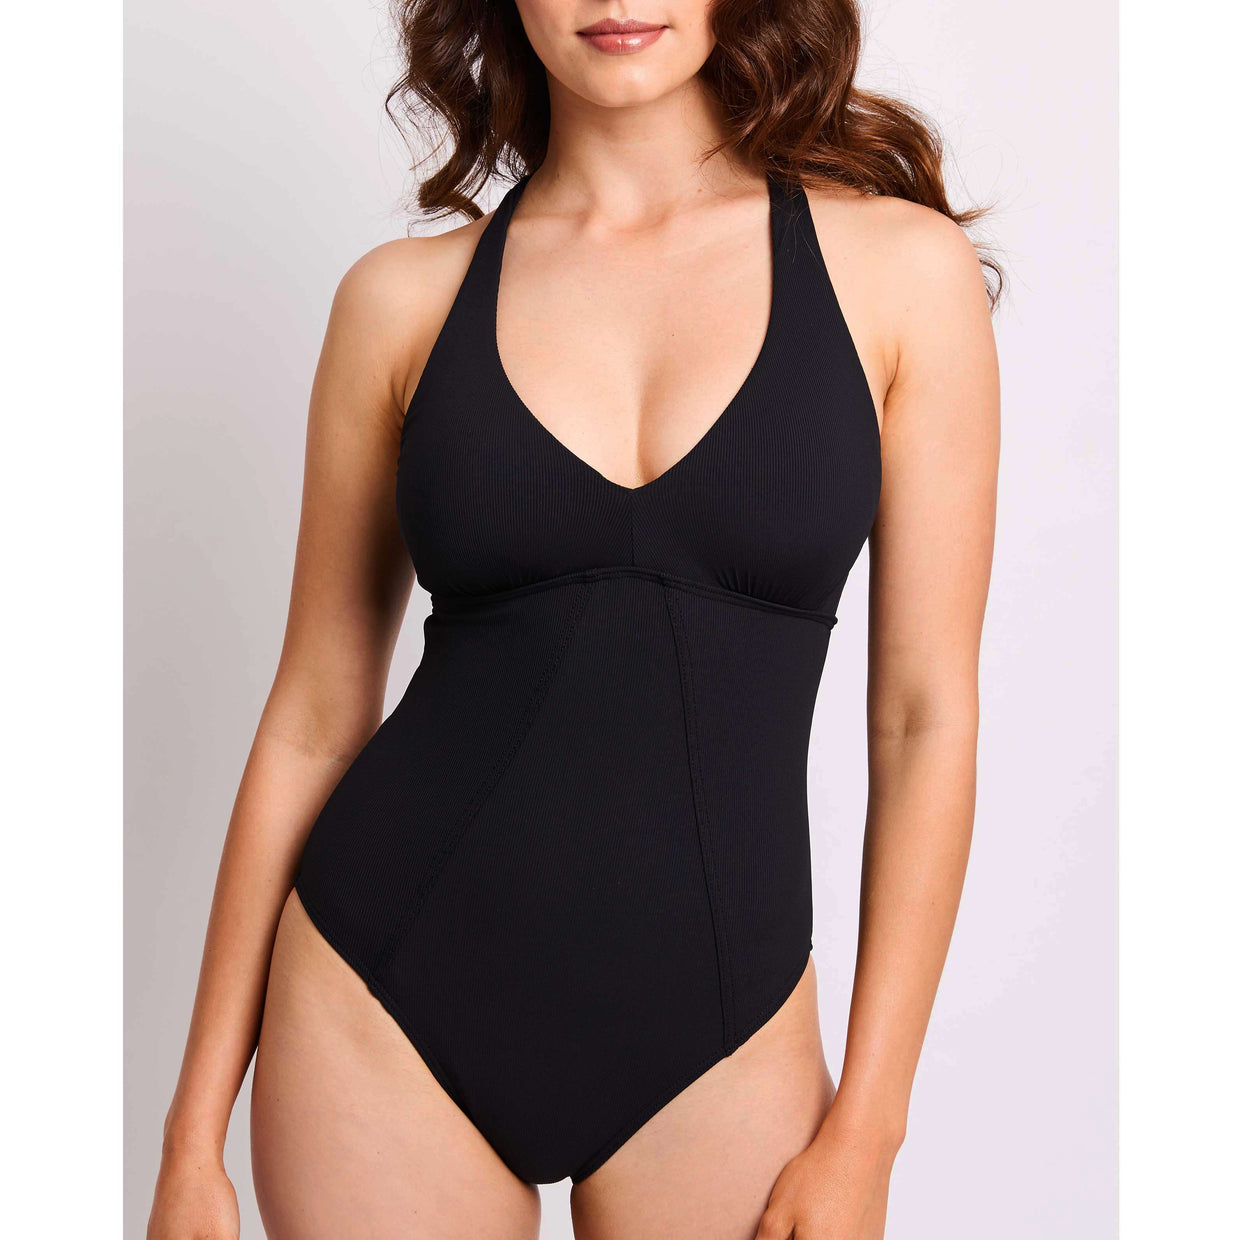 Janet-one-piece-ribbed-black-2-contessa-volpi-summer-swimwear-collection